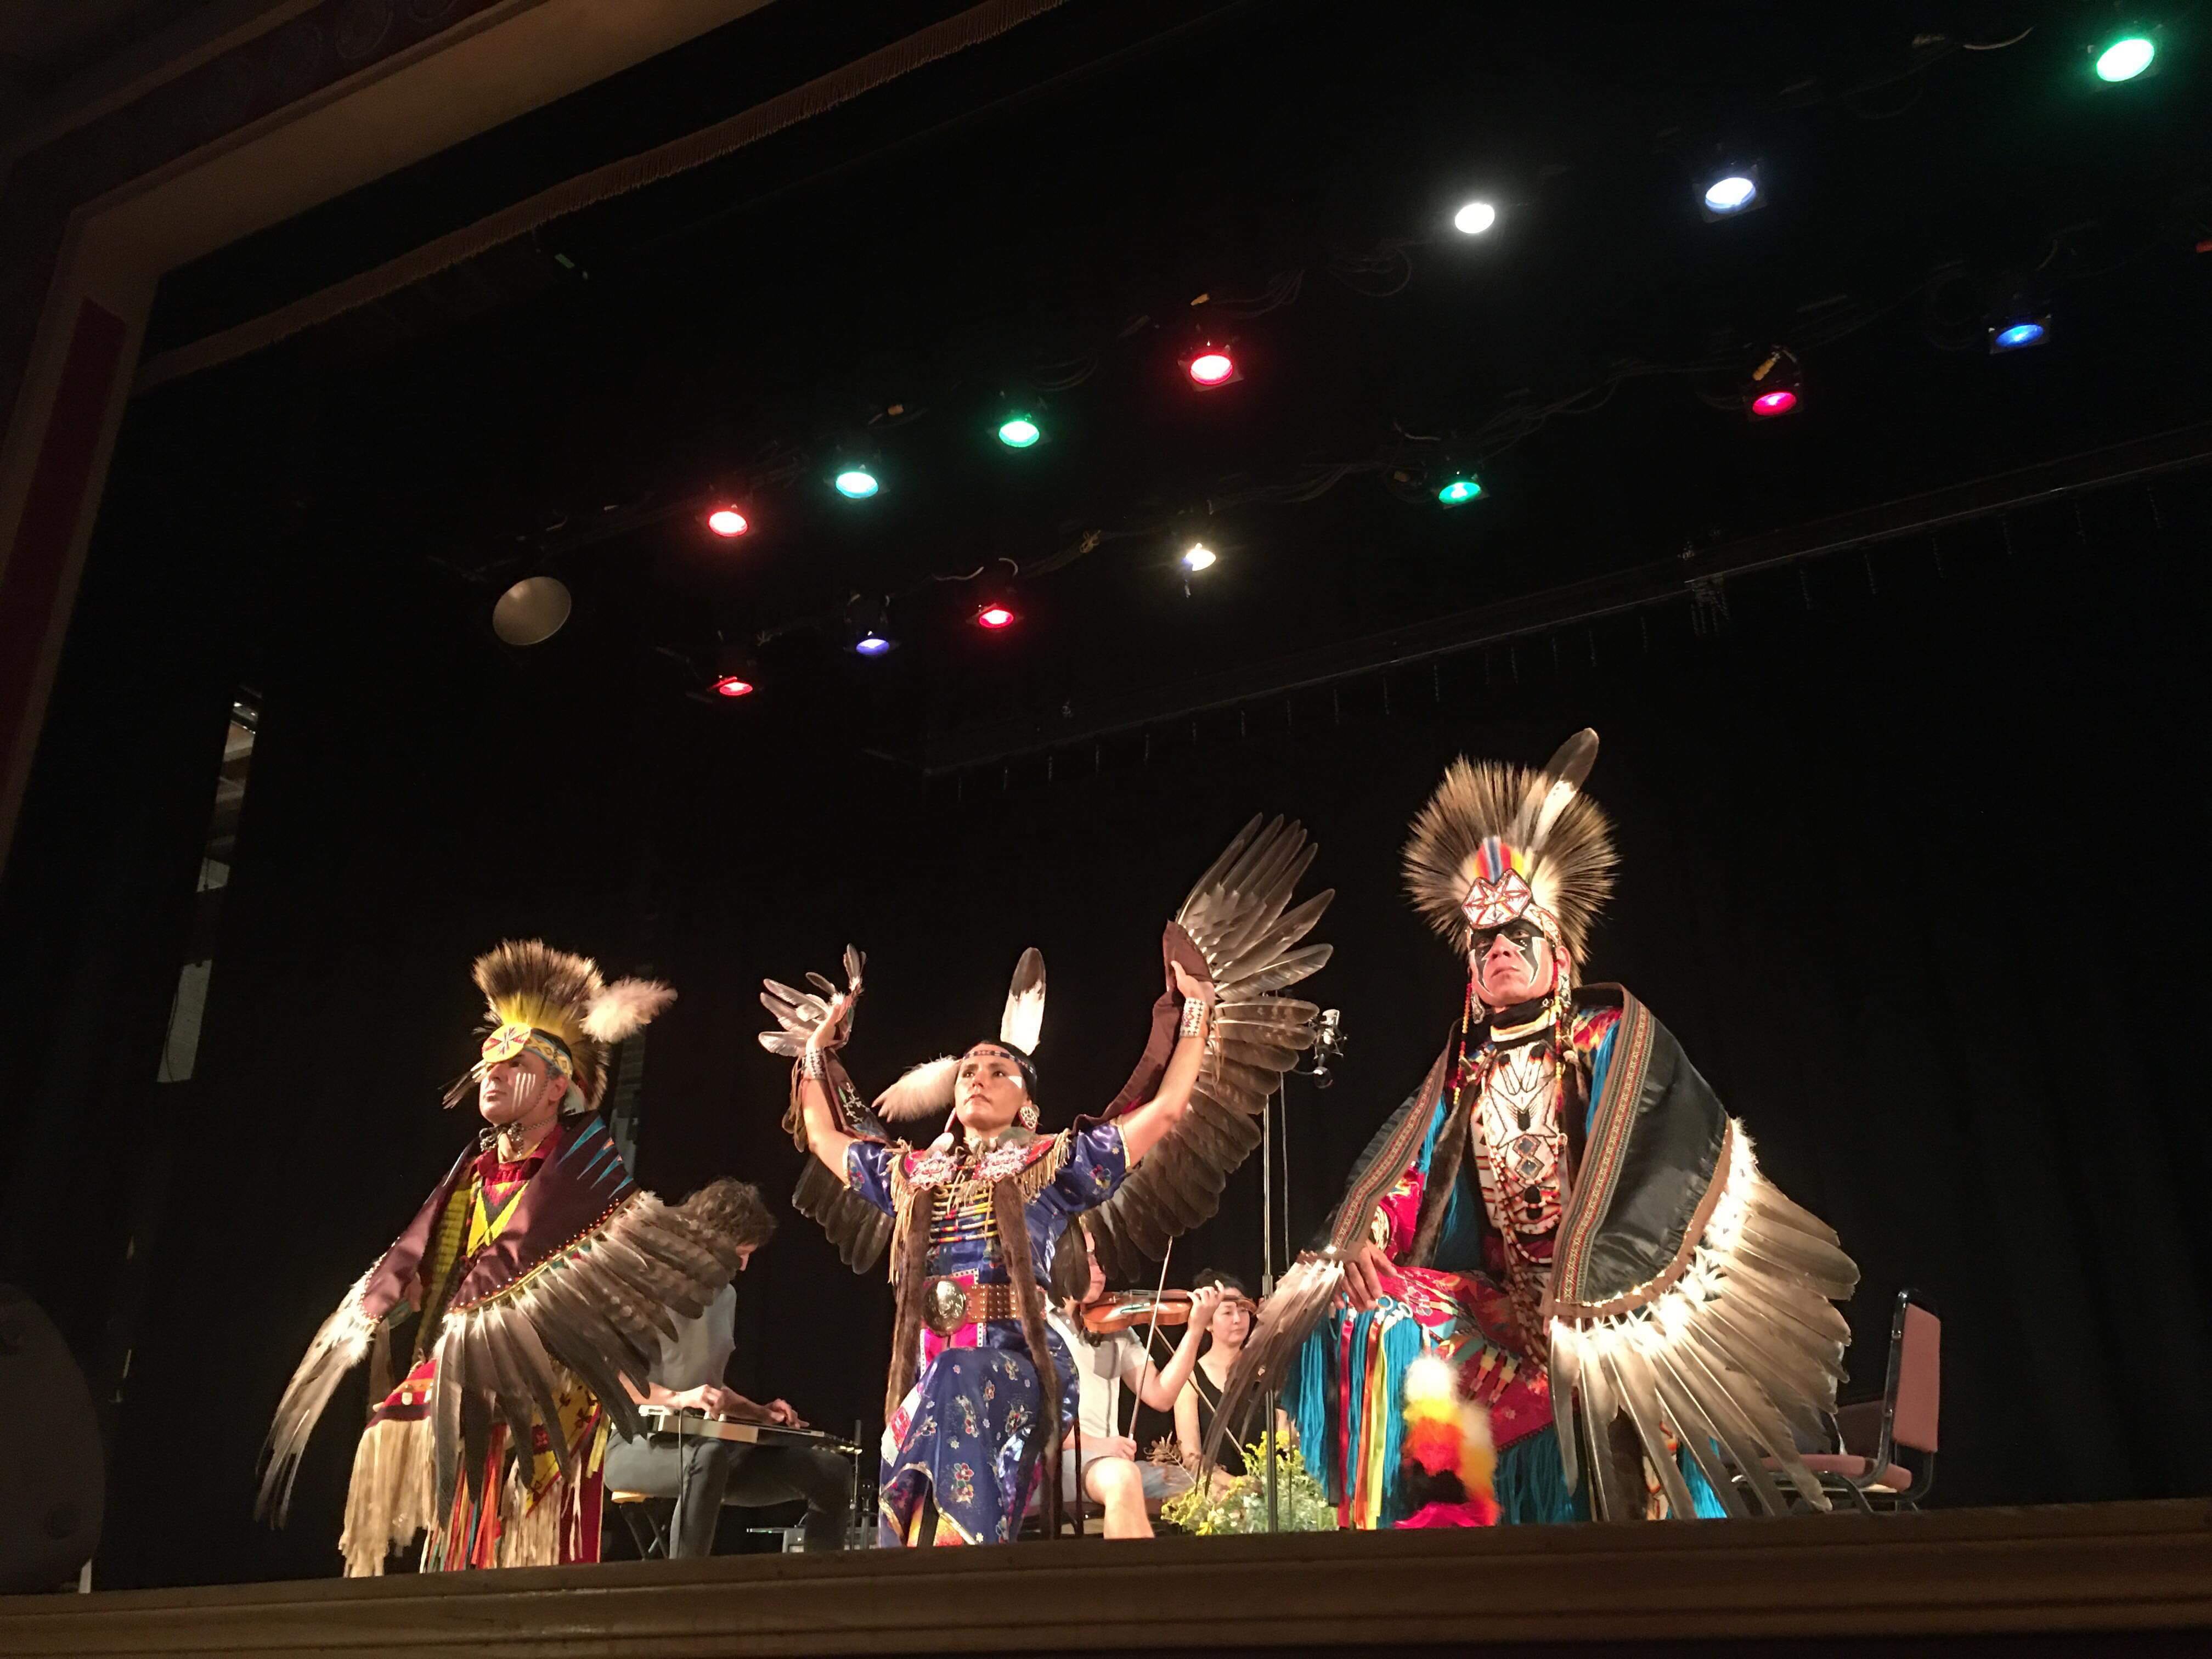 Woodland Sky Native American Dance Company will perform at the Beethoven and Banjos: Watershed Moment concert on Sunday, Aug. 29, at the Rosza Center for the Performing Arts in Houghton, Michigan. (Chad Reed)